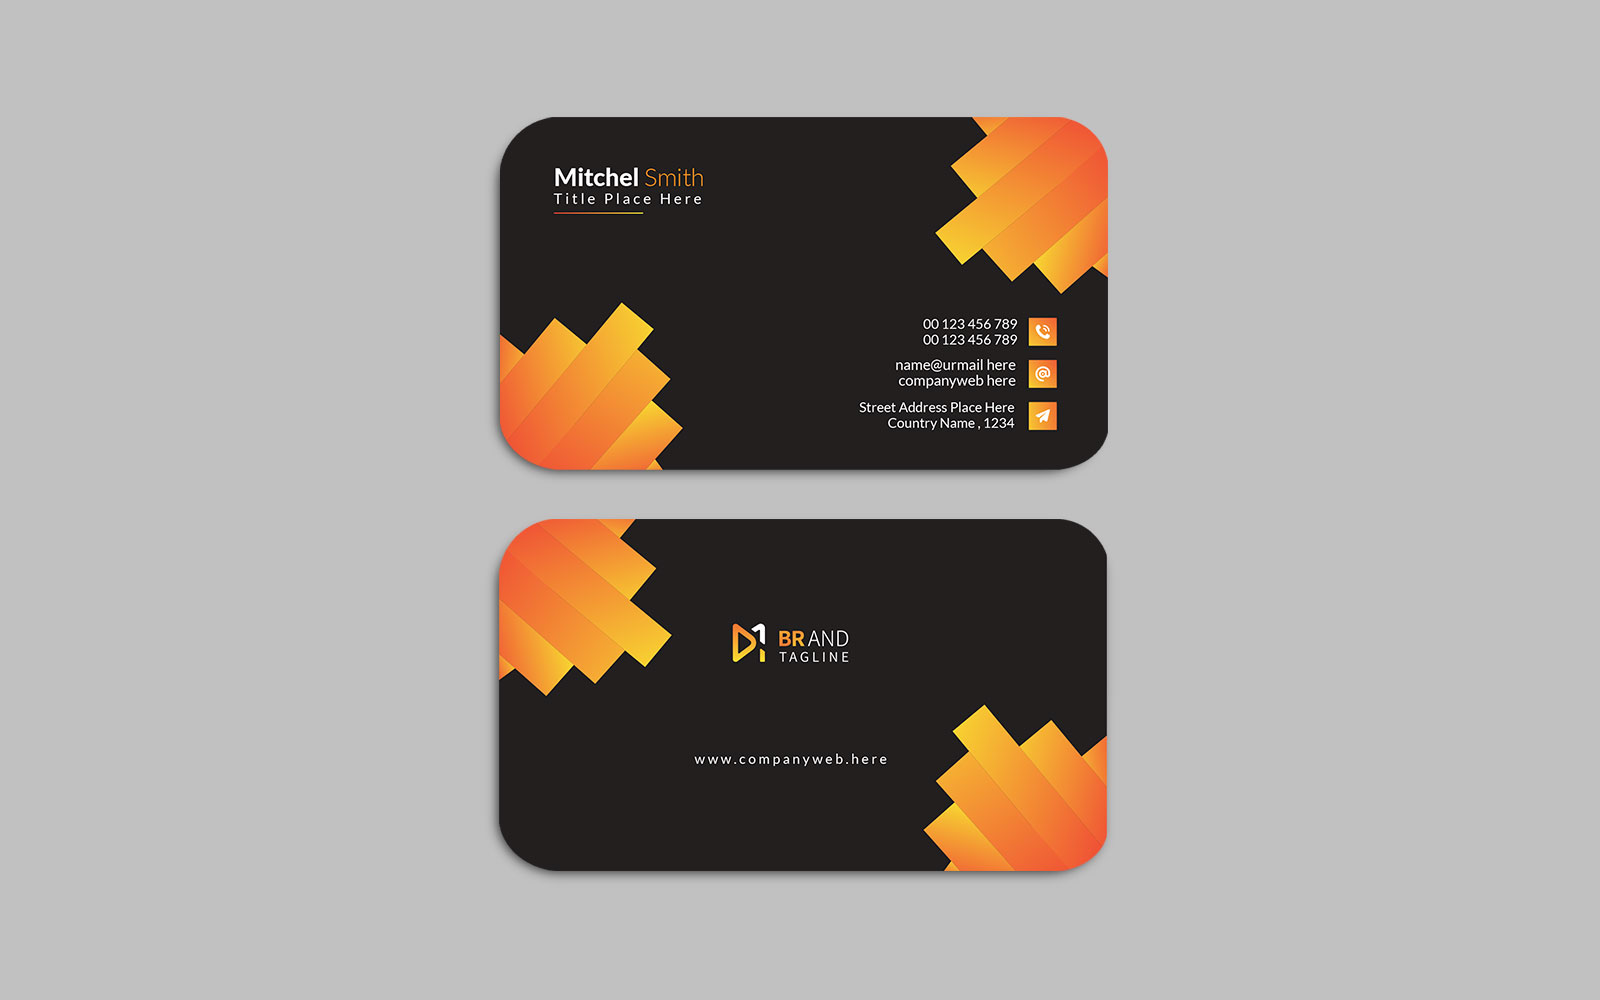 Clean and modern visiting card template design